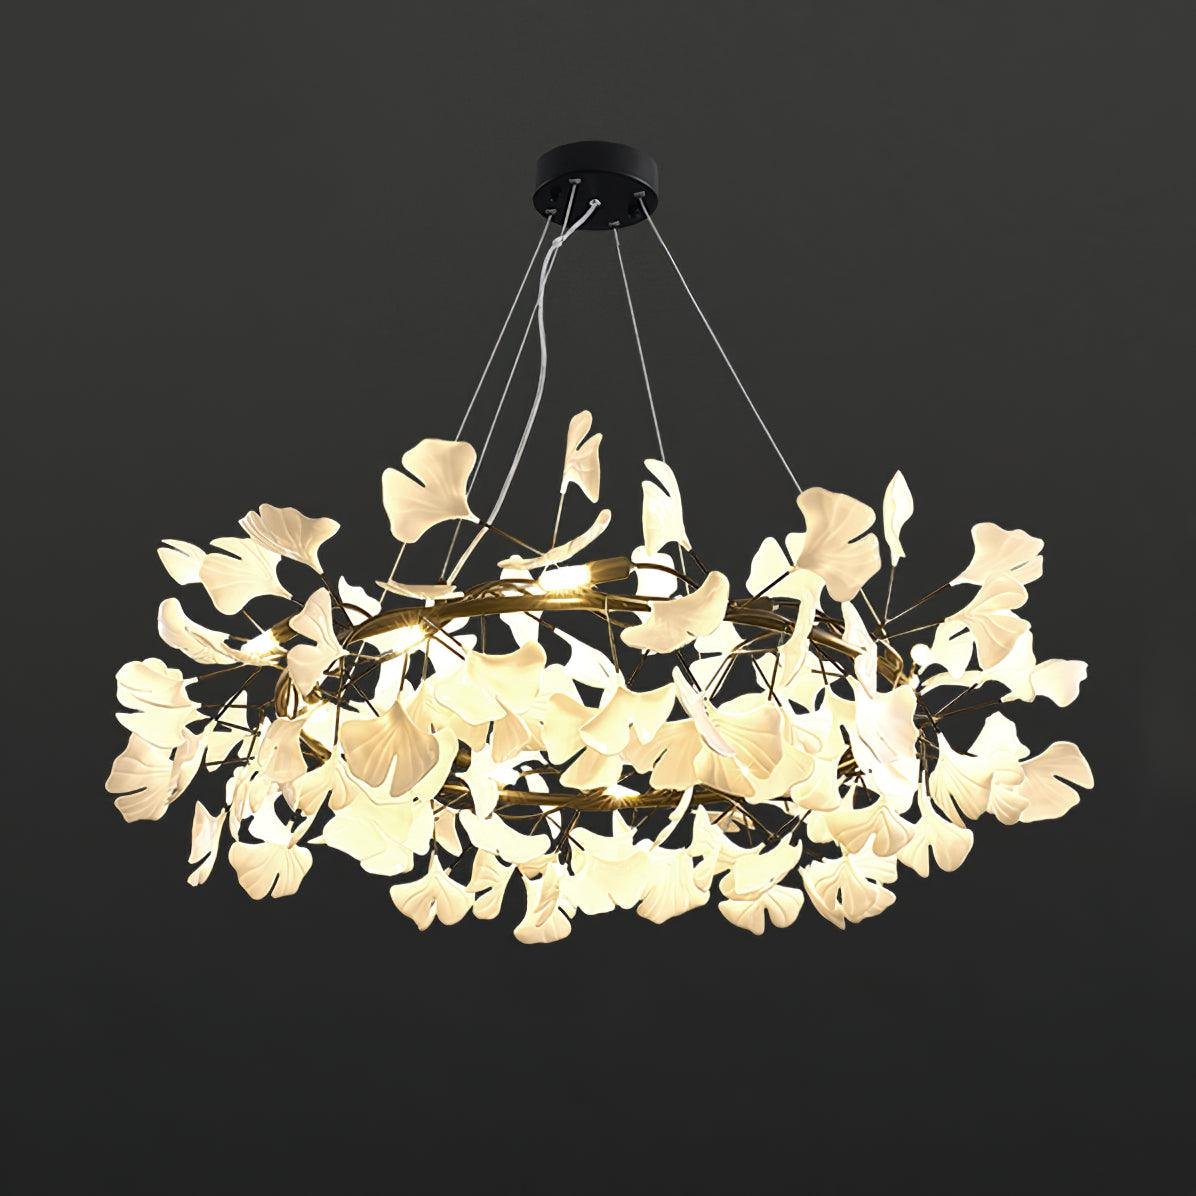 Black and White Gingko Chandelier in 39.4" diameter and 11.8" height, or 100cm diameter and 30cm height